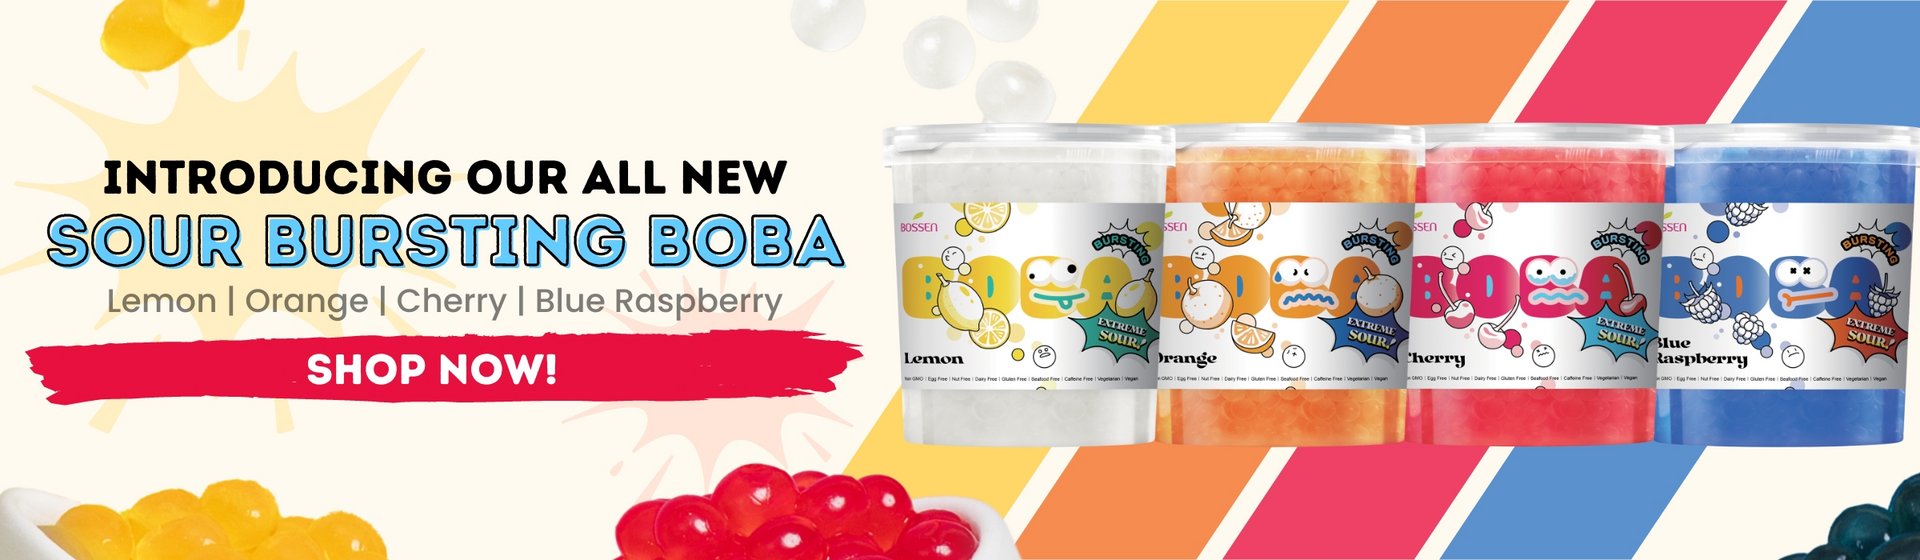 Introducing Our all new Sour Bursting Boba in 4 flavors - Cherry, Lemon, Orange and Blue Raspberry